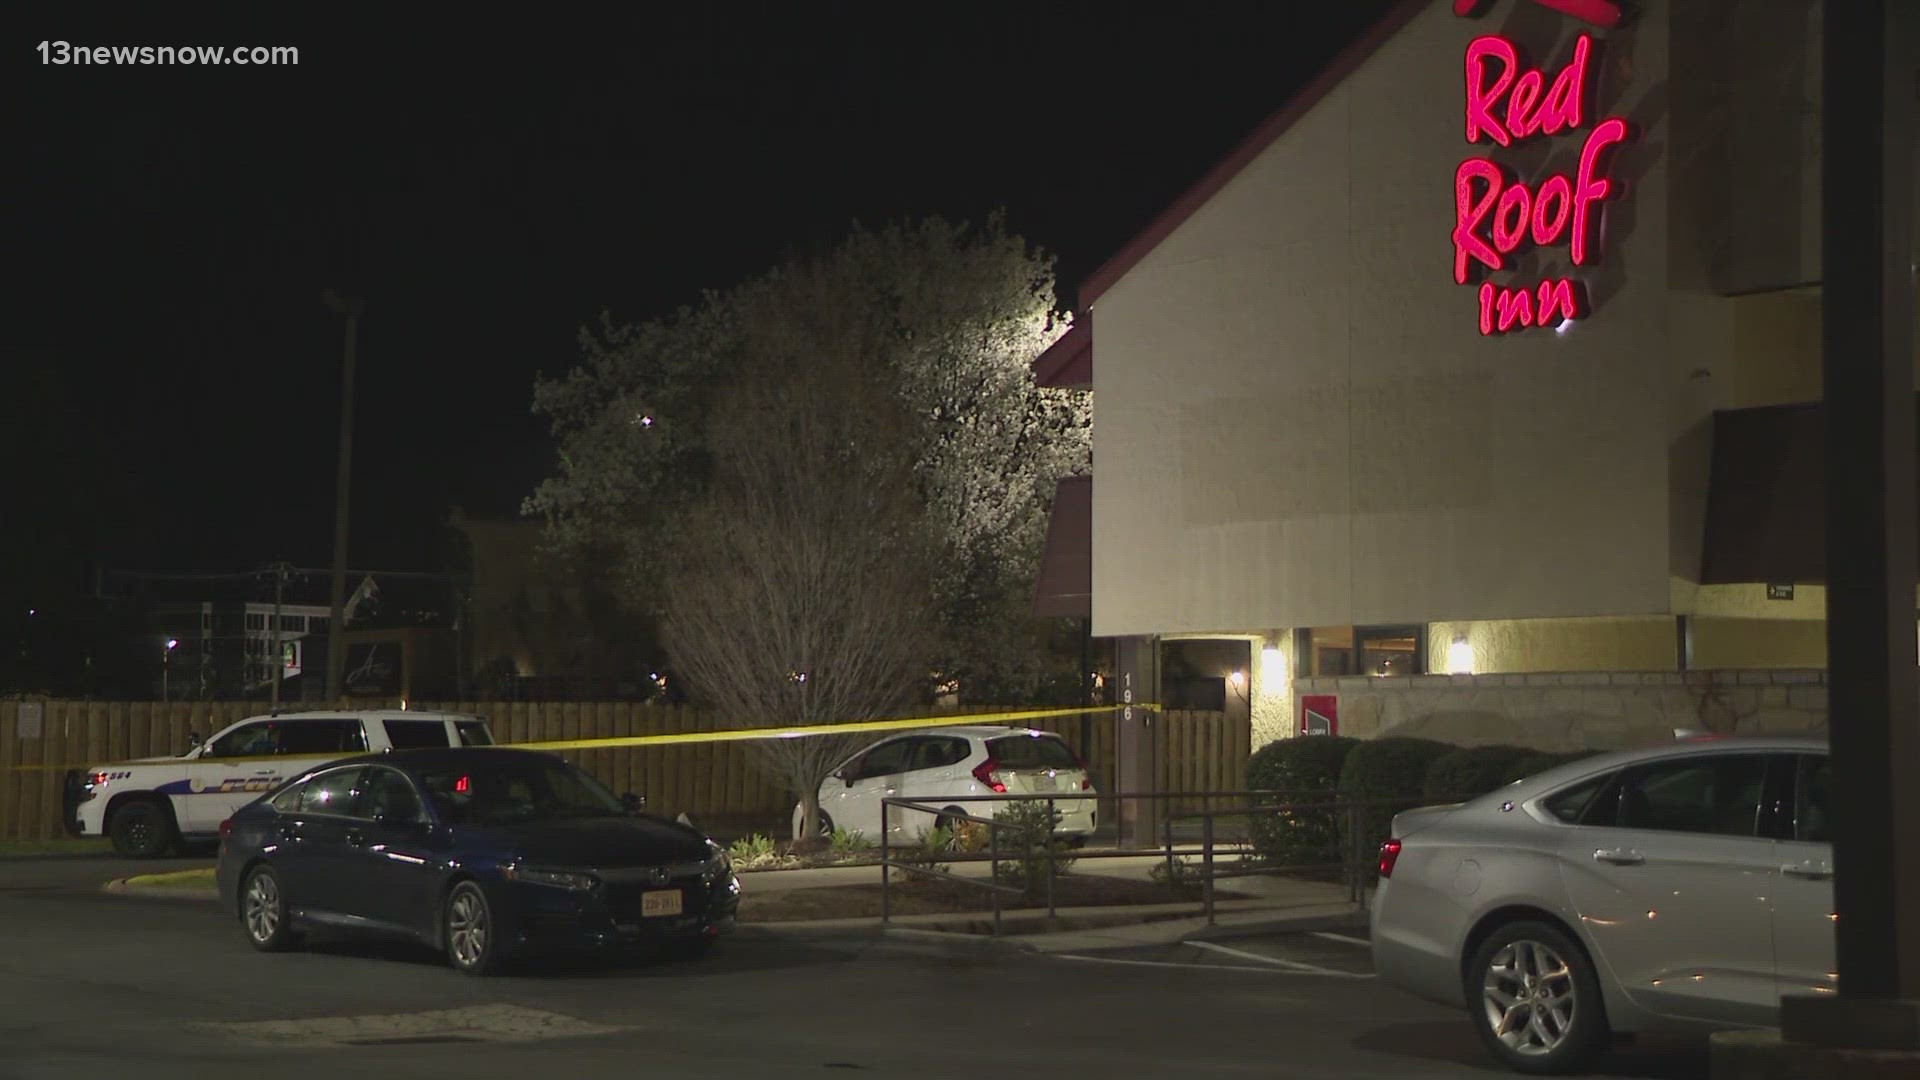 Two people were arrested in connection to a deadly shooting at a Red Roof Inn in Virginia Beach earlier this month, police said.